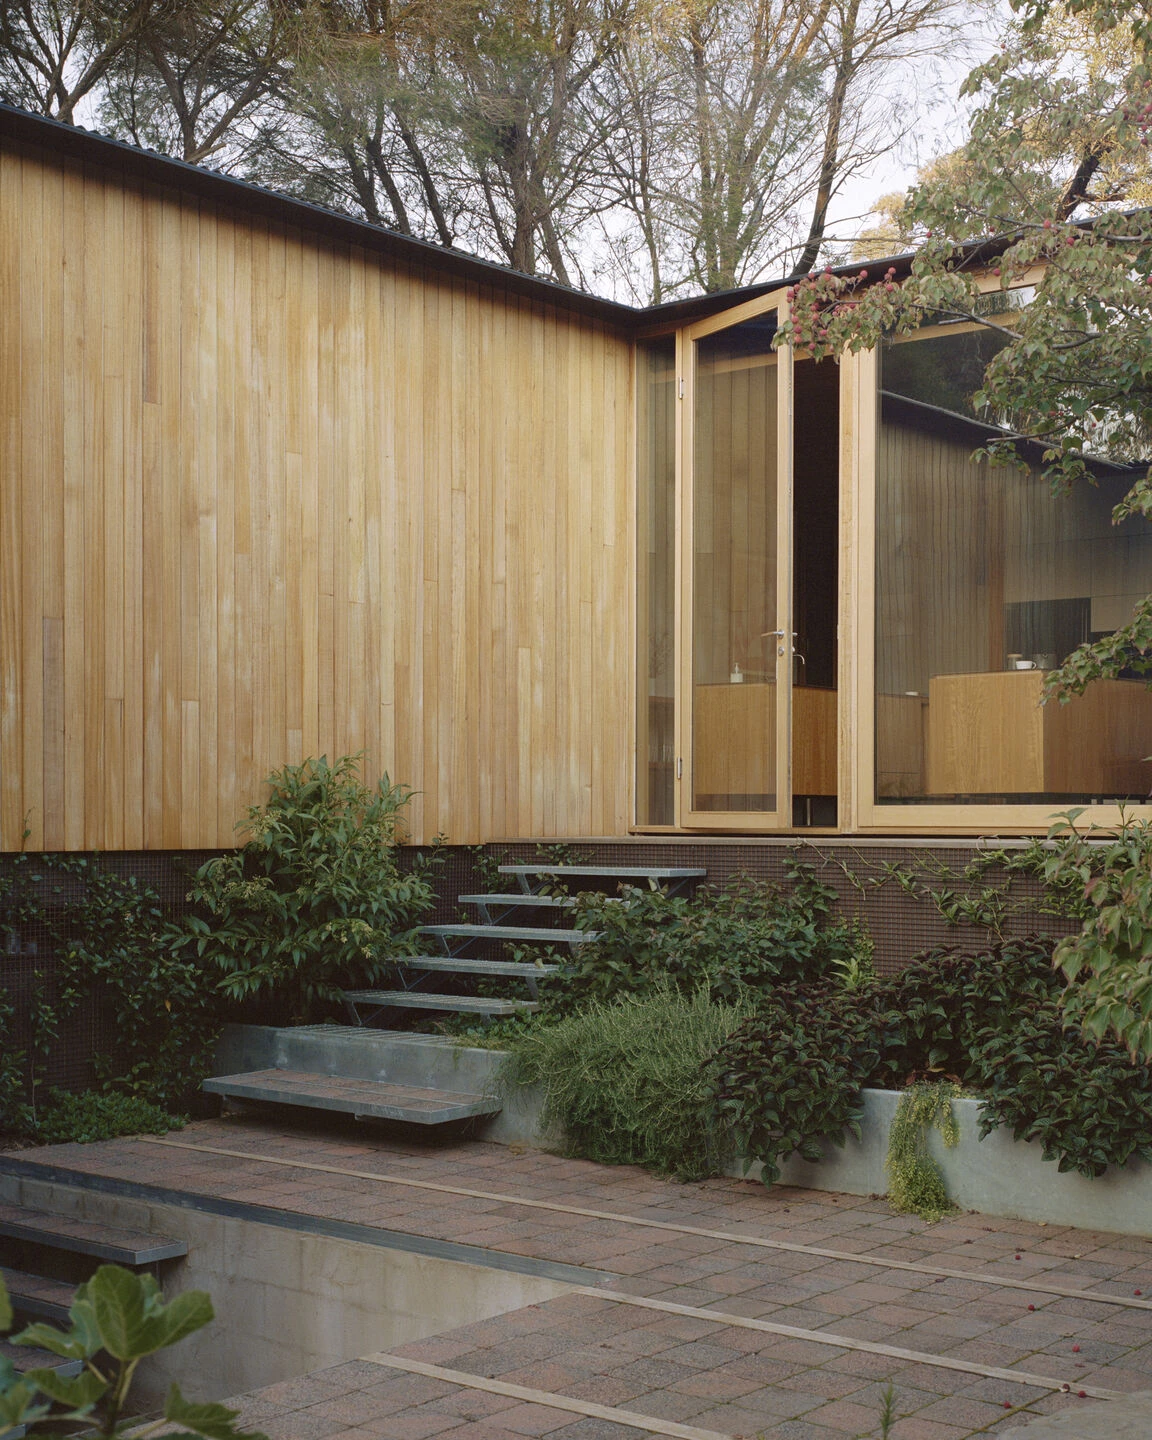 Wood-paneled courtyard house - entrance view